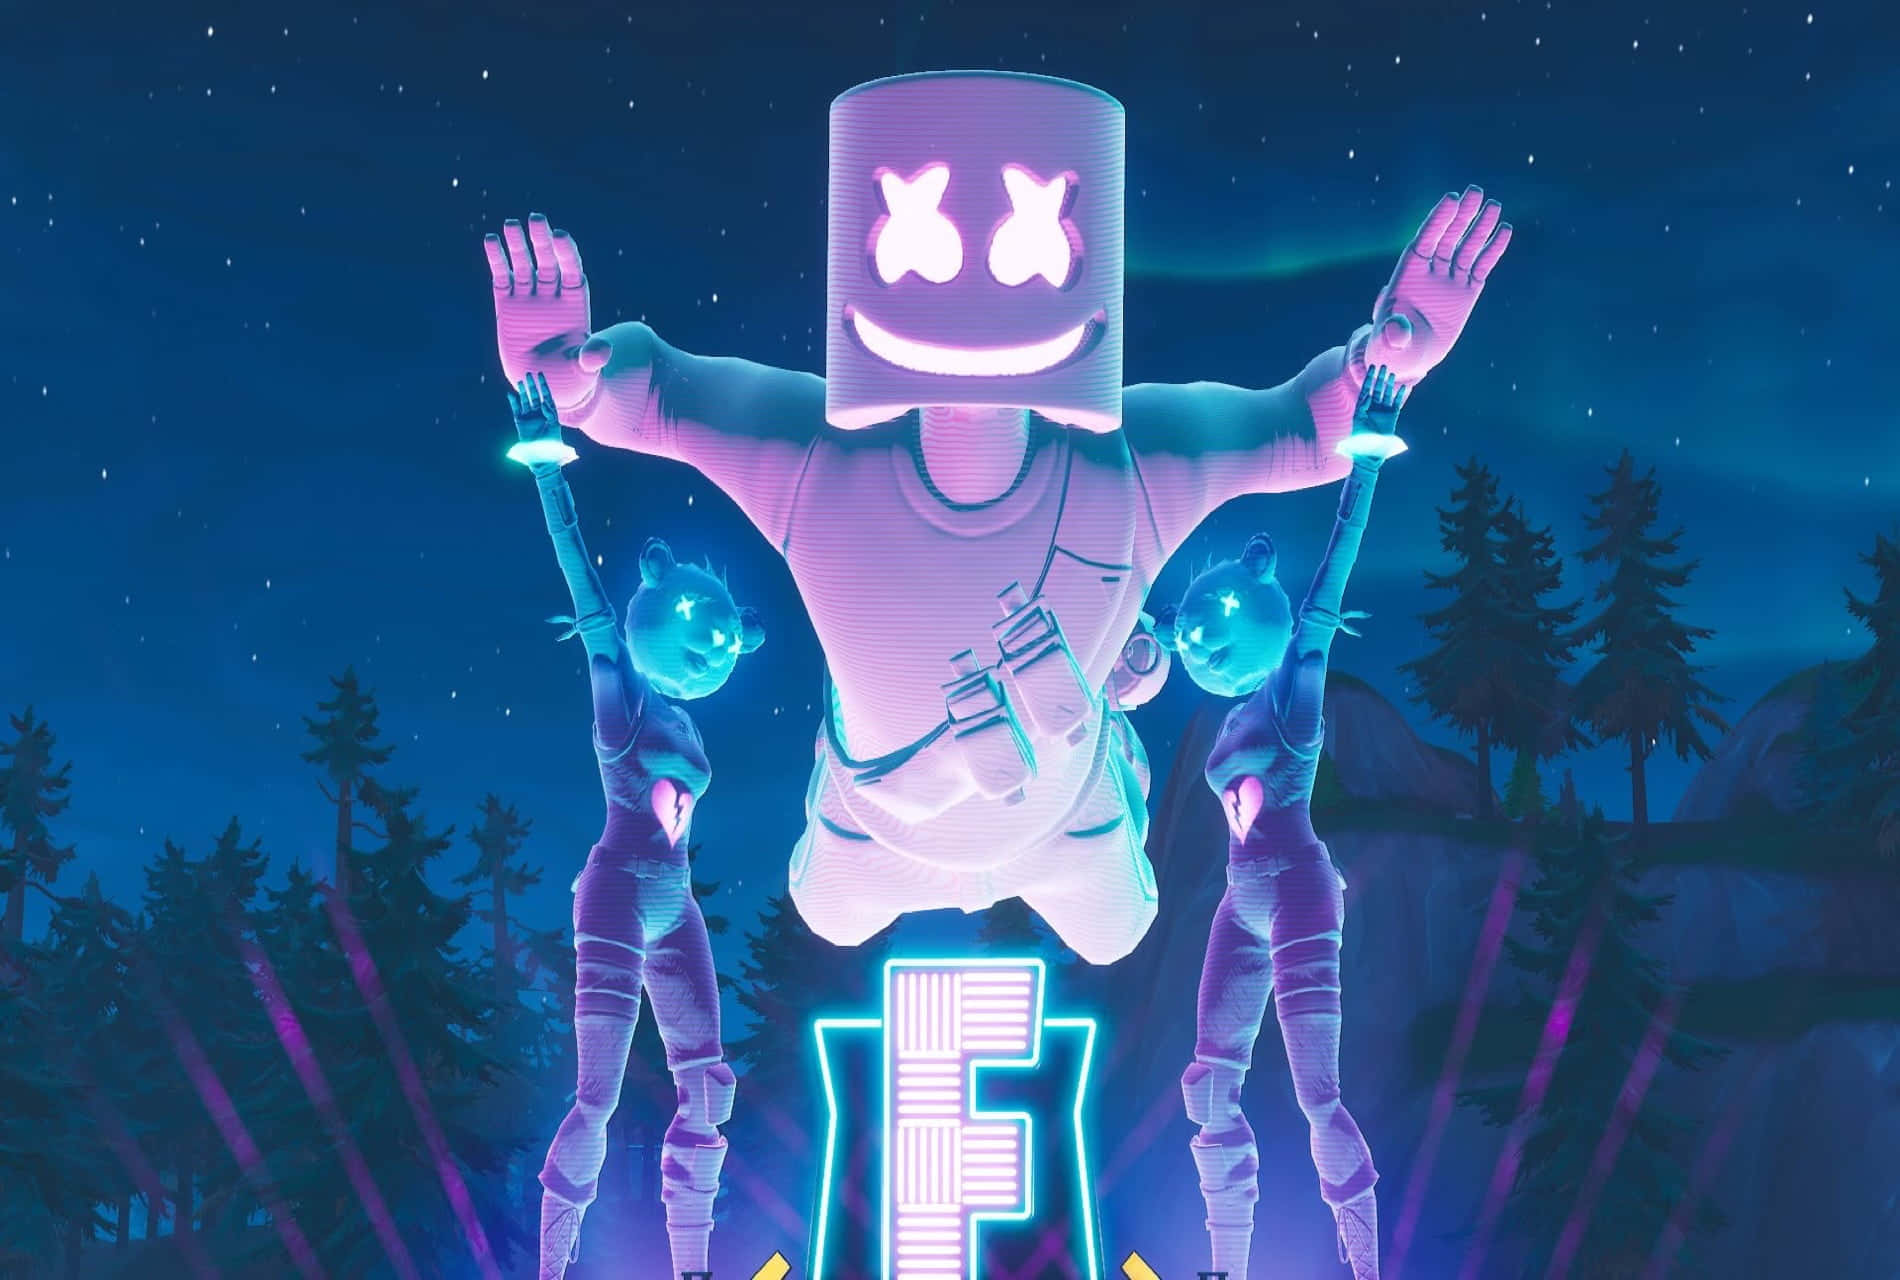 Celebrate Victory Royale with Marshmello in Fortnite! Wallpaper